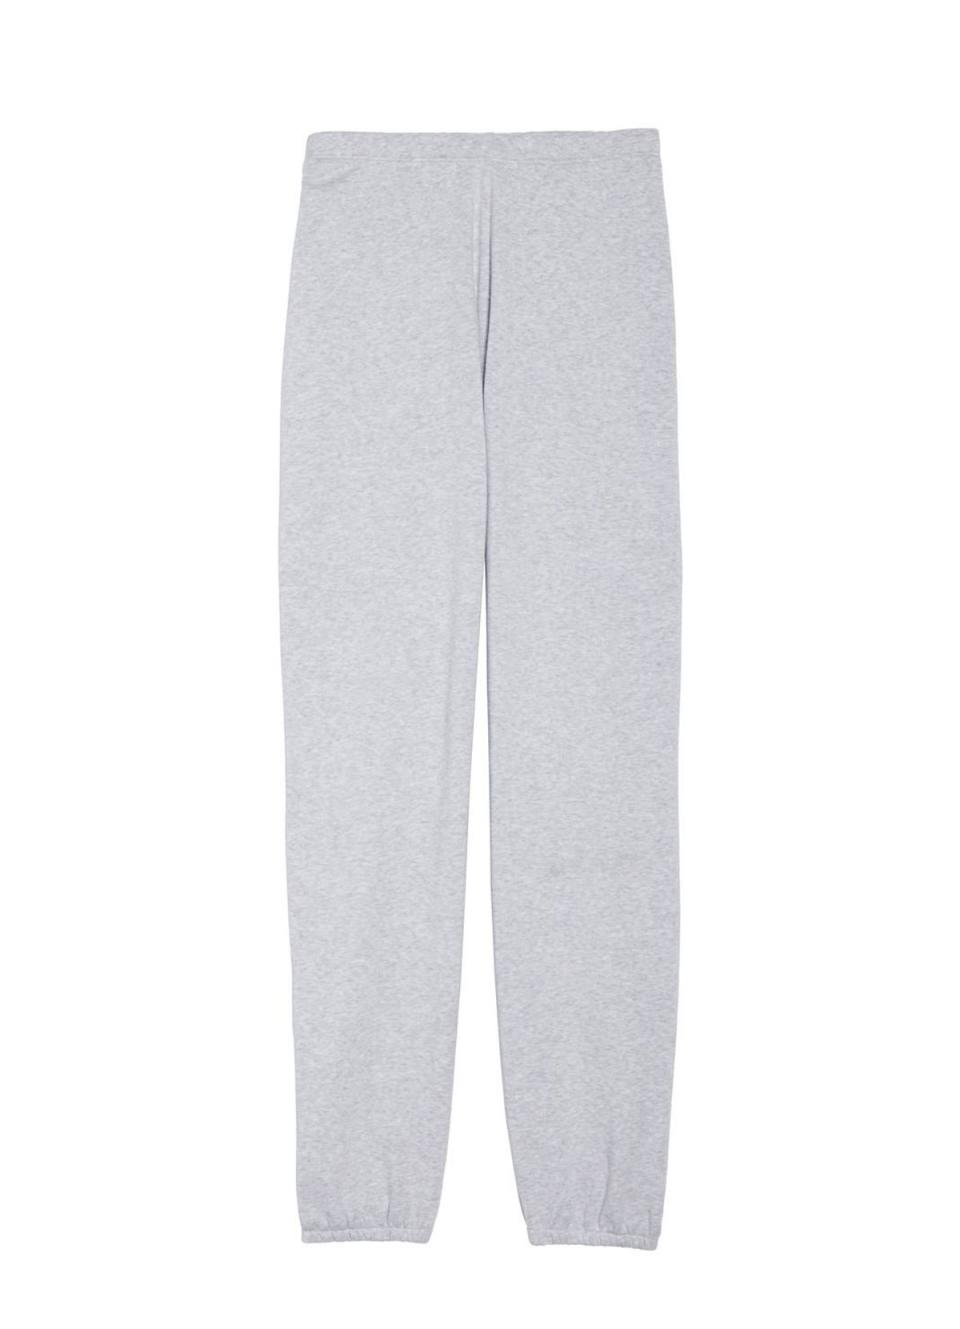 "I sleep in sweatpants year-round, and these look comfy. Sold." —PS